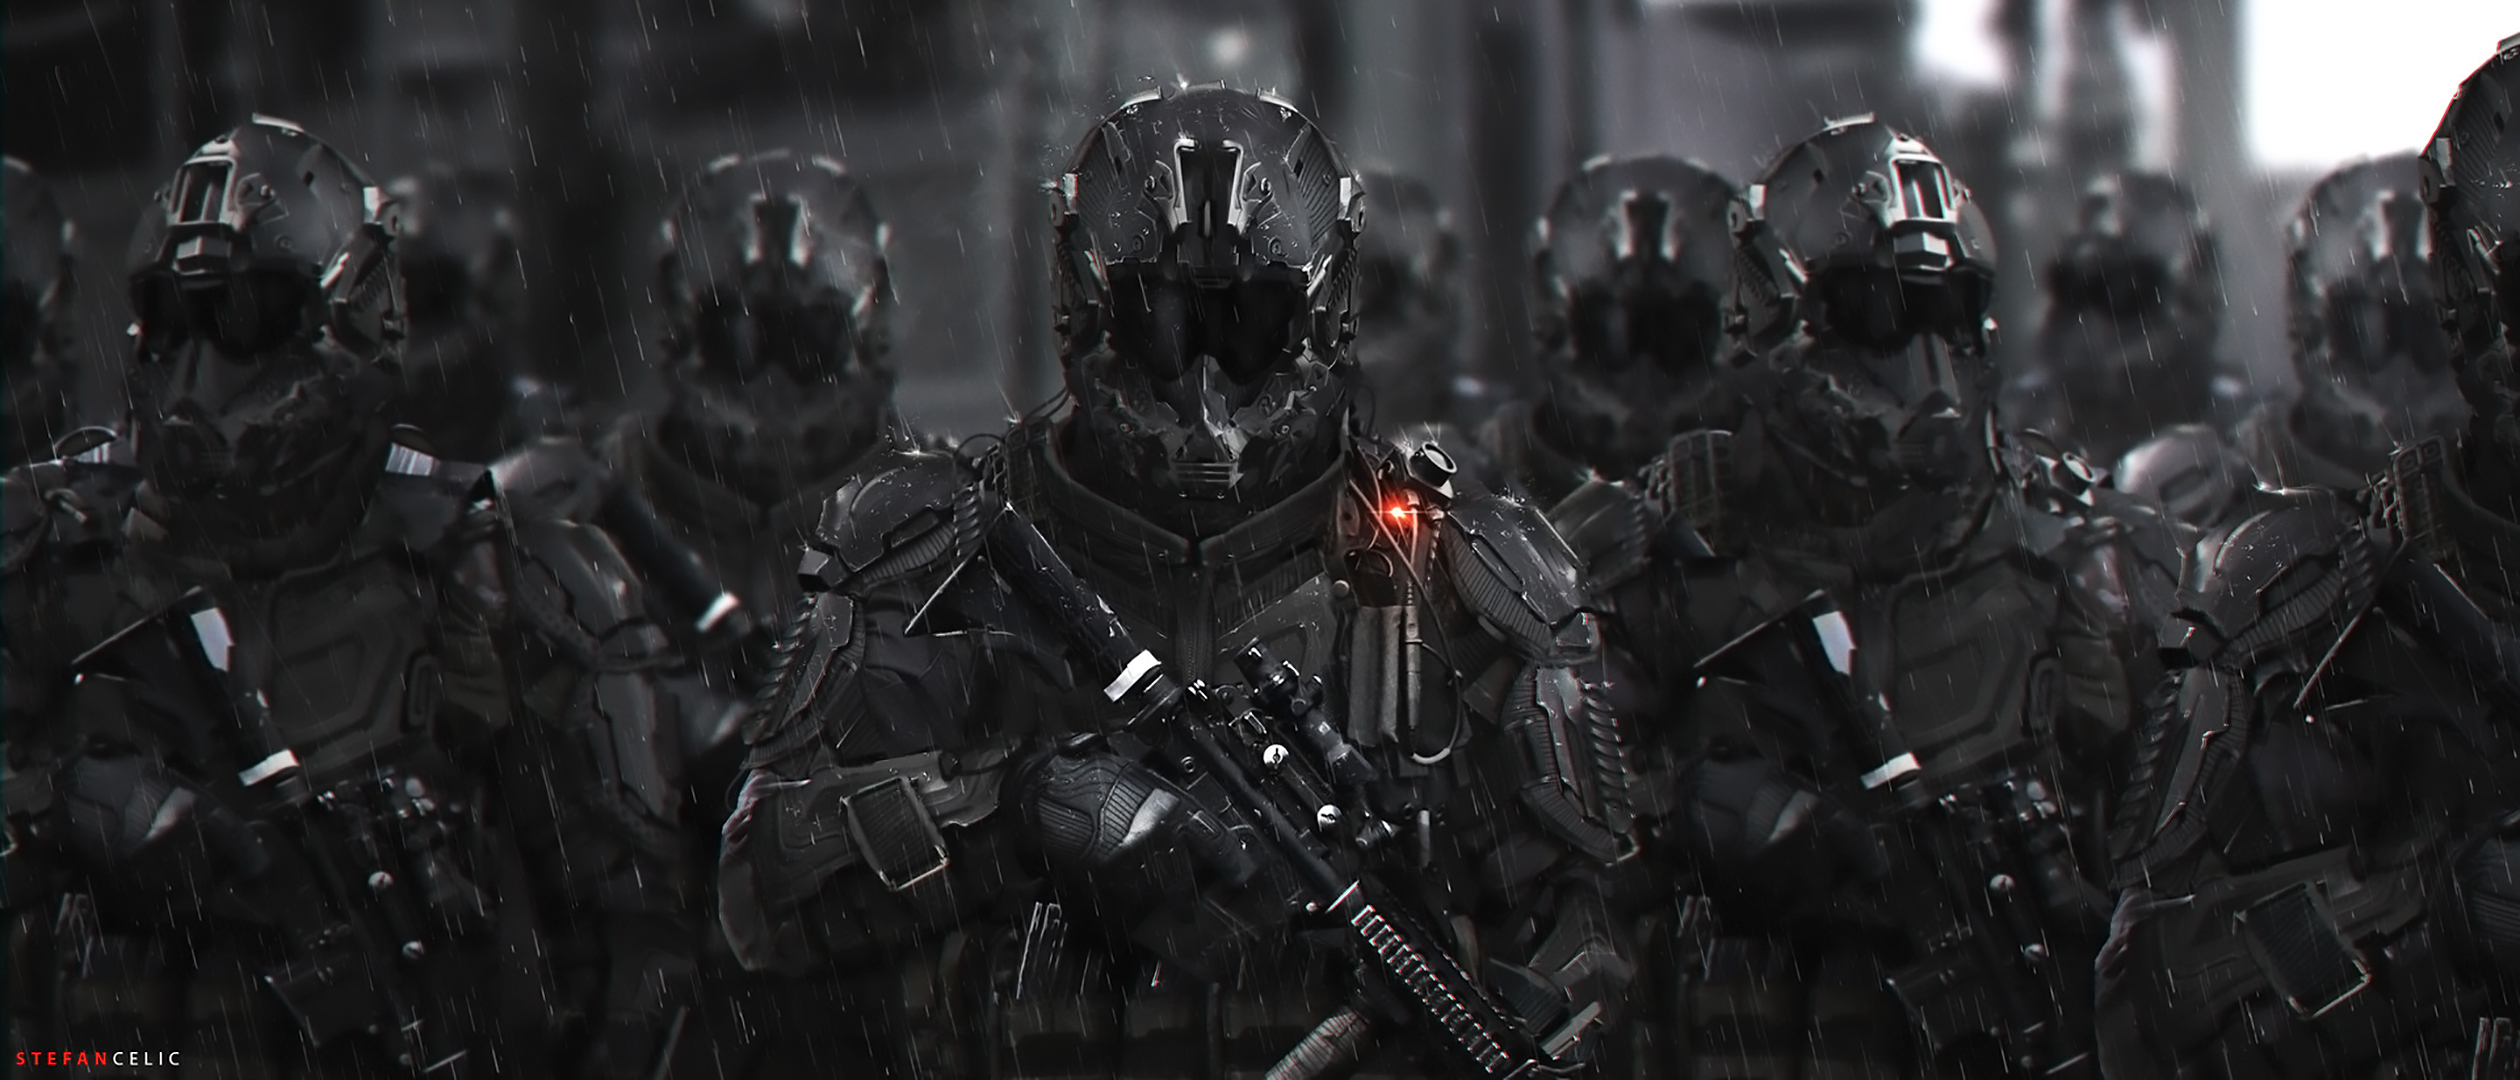 Armor Futuristic Military Soldier Weapon 2520x1080